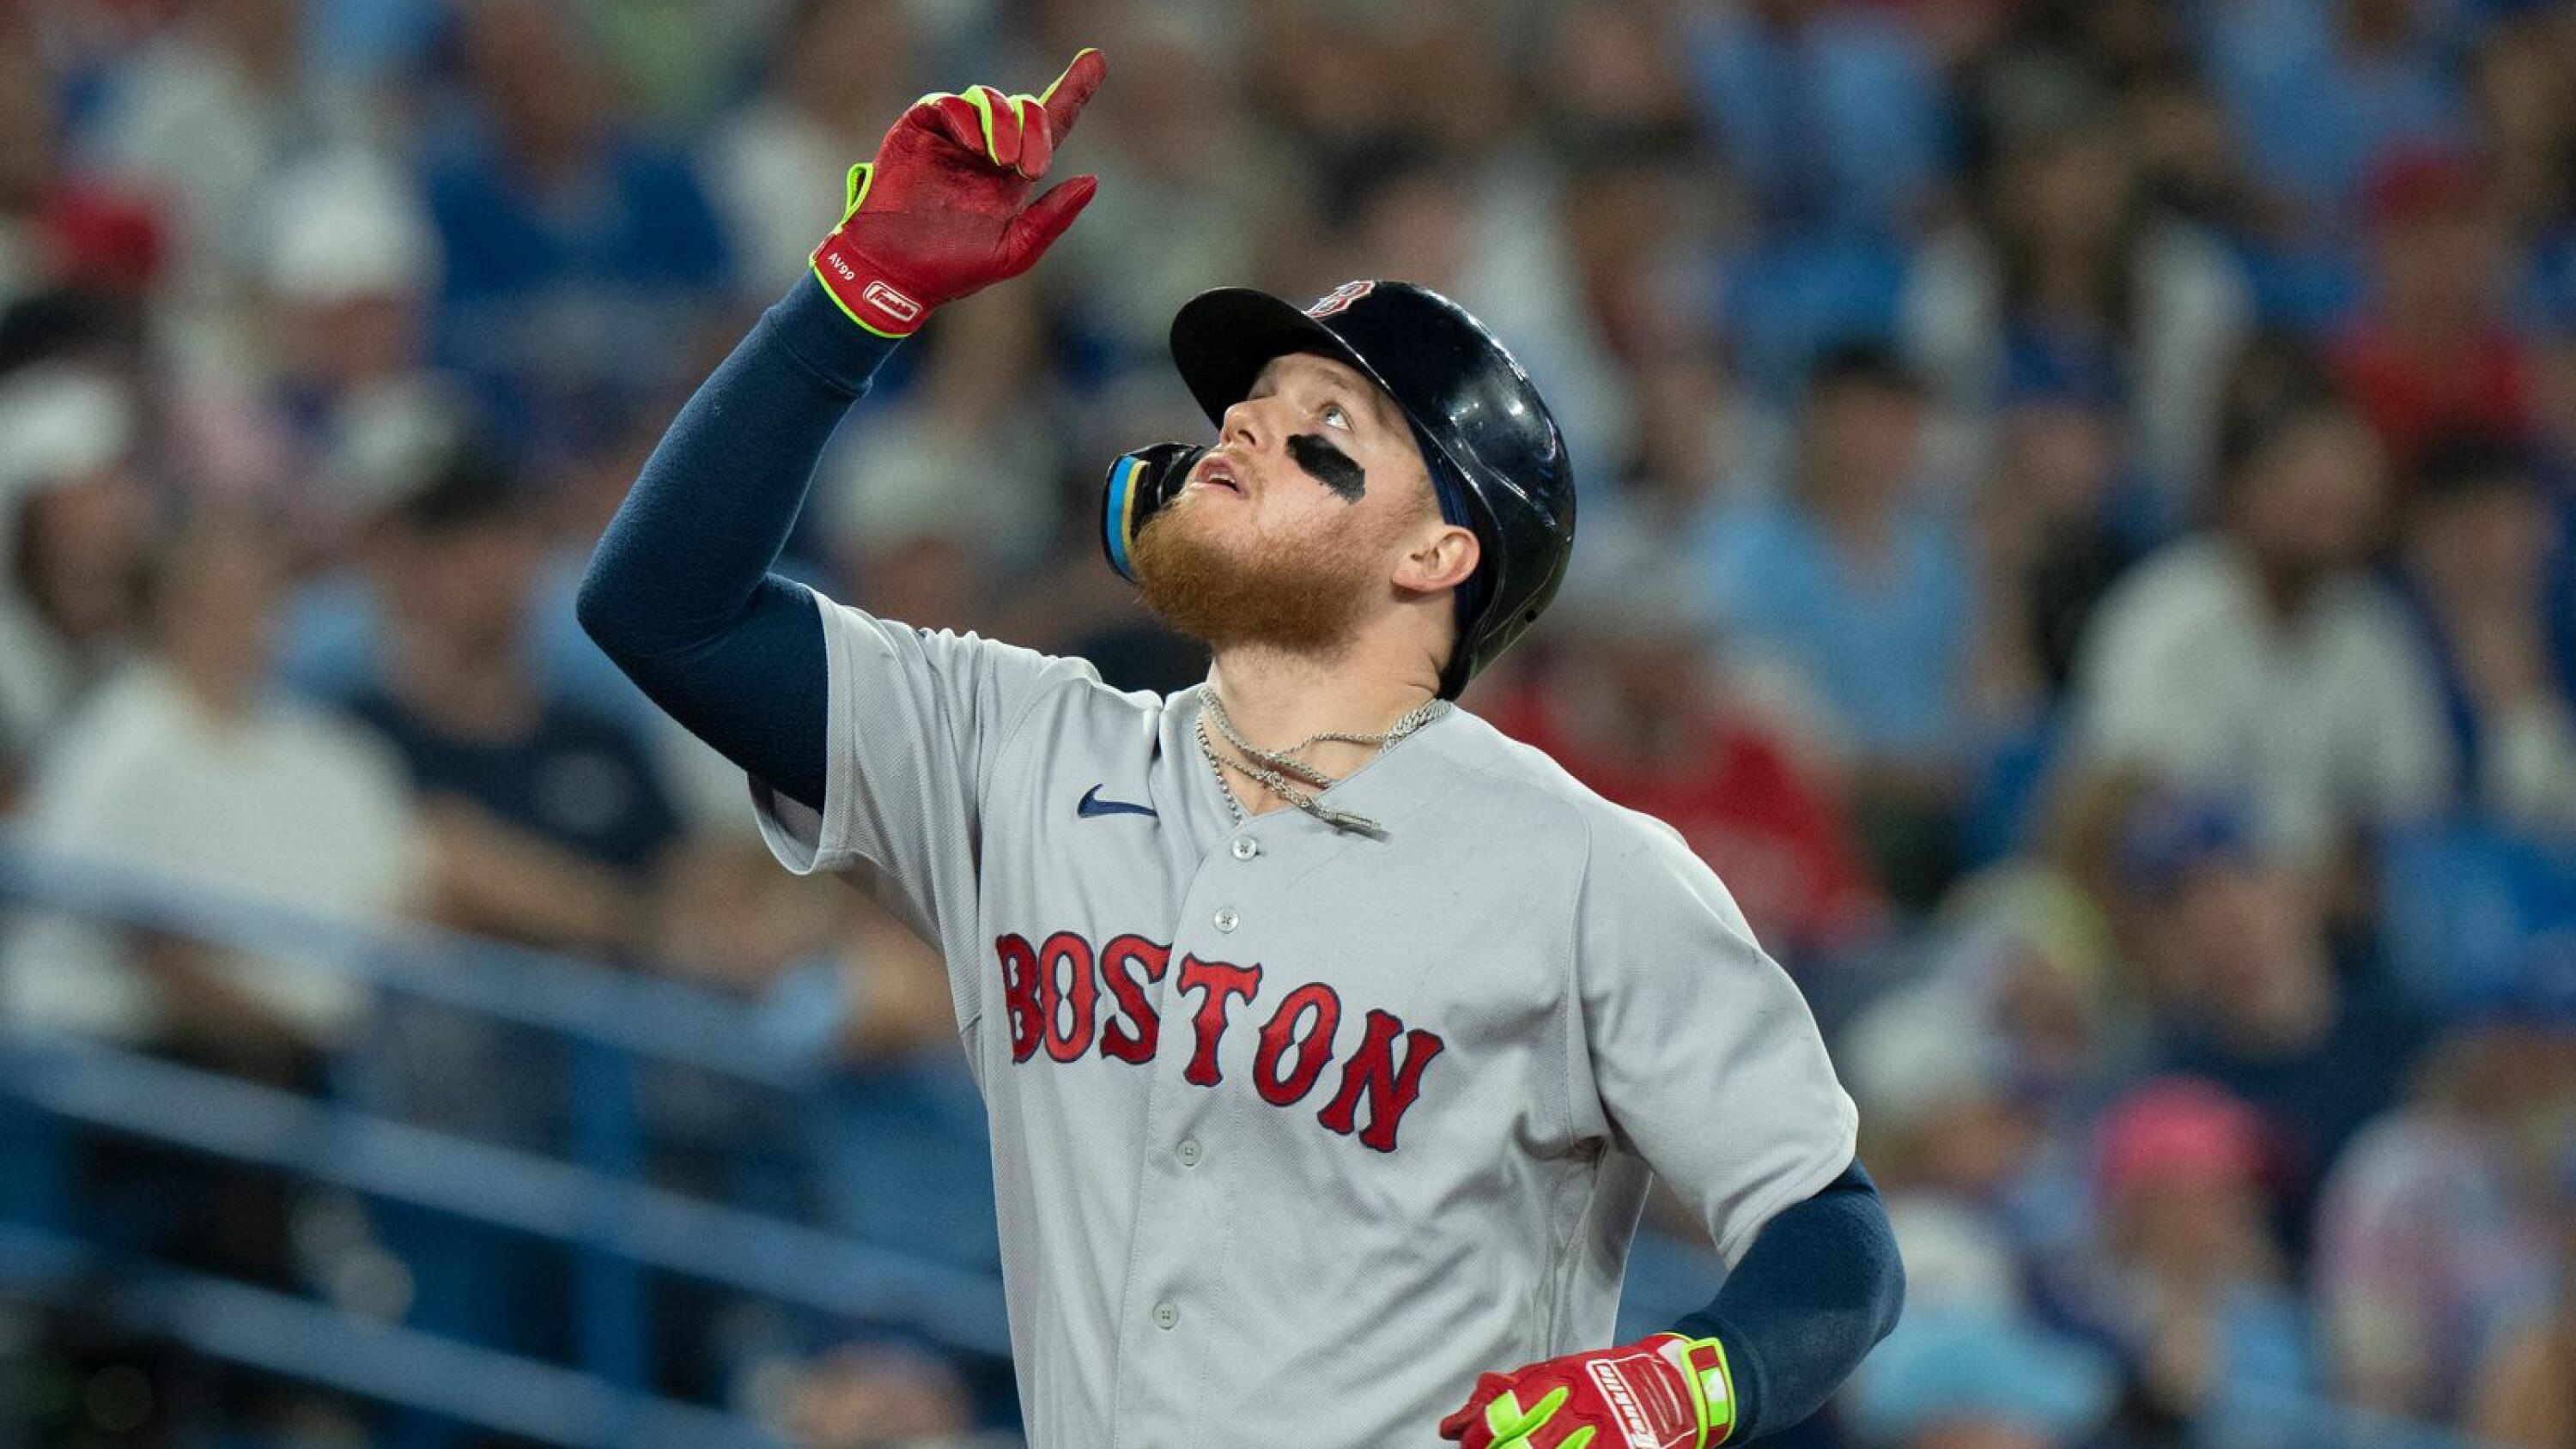 Verdugo's home run in the 9th gives Red Sox a 5-4 win and three